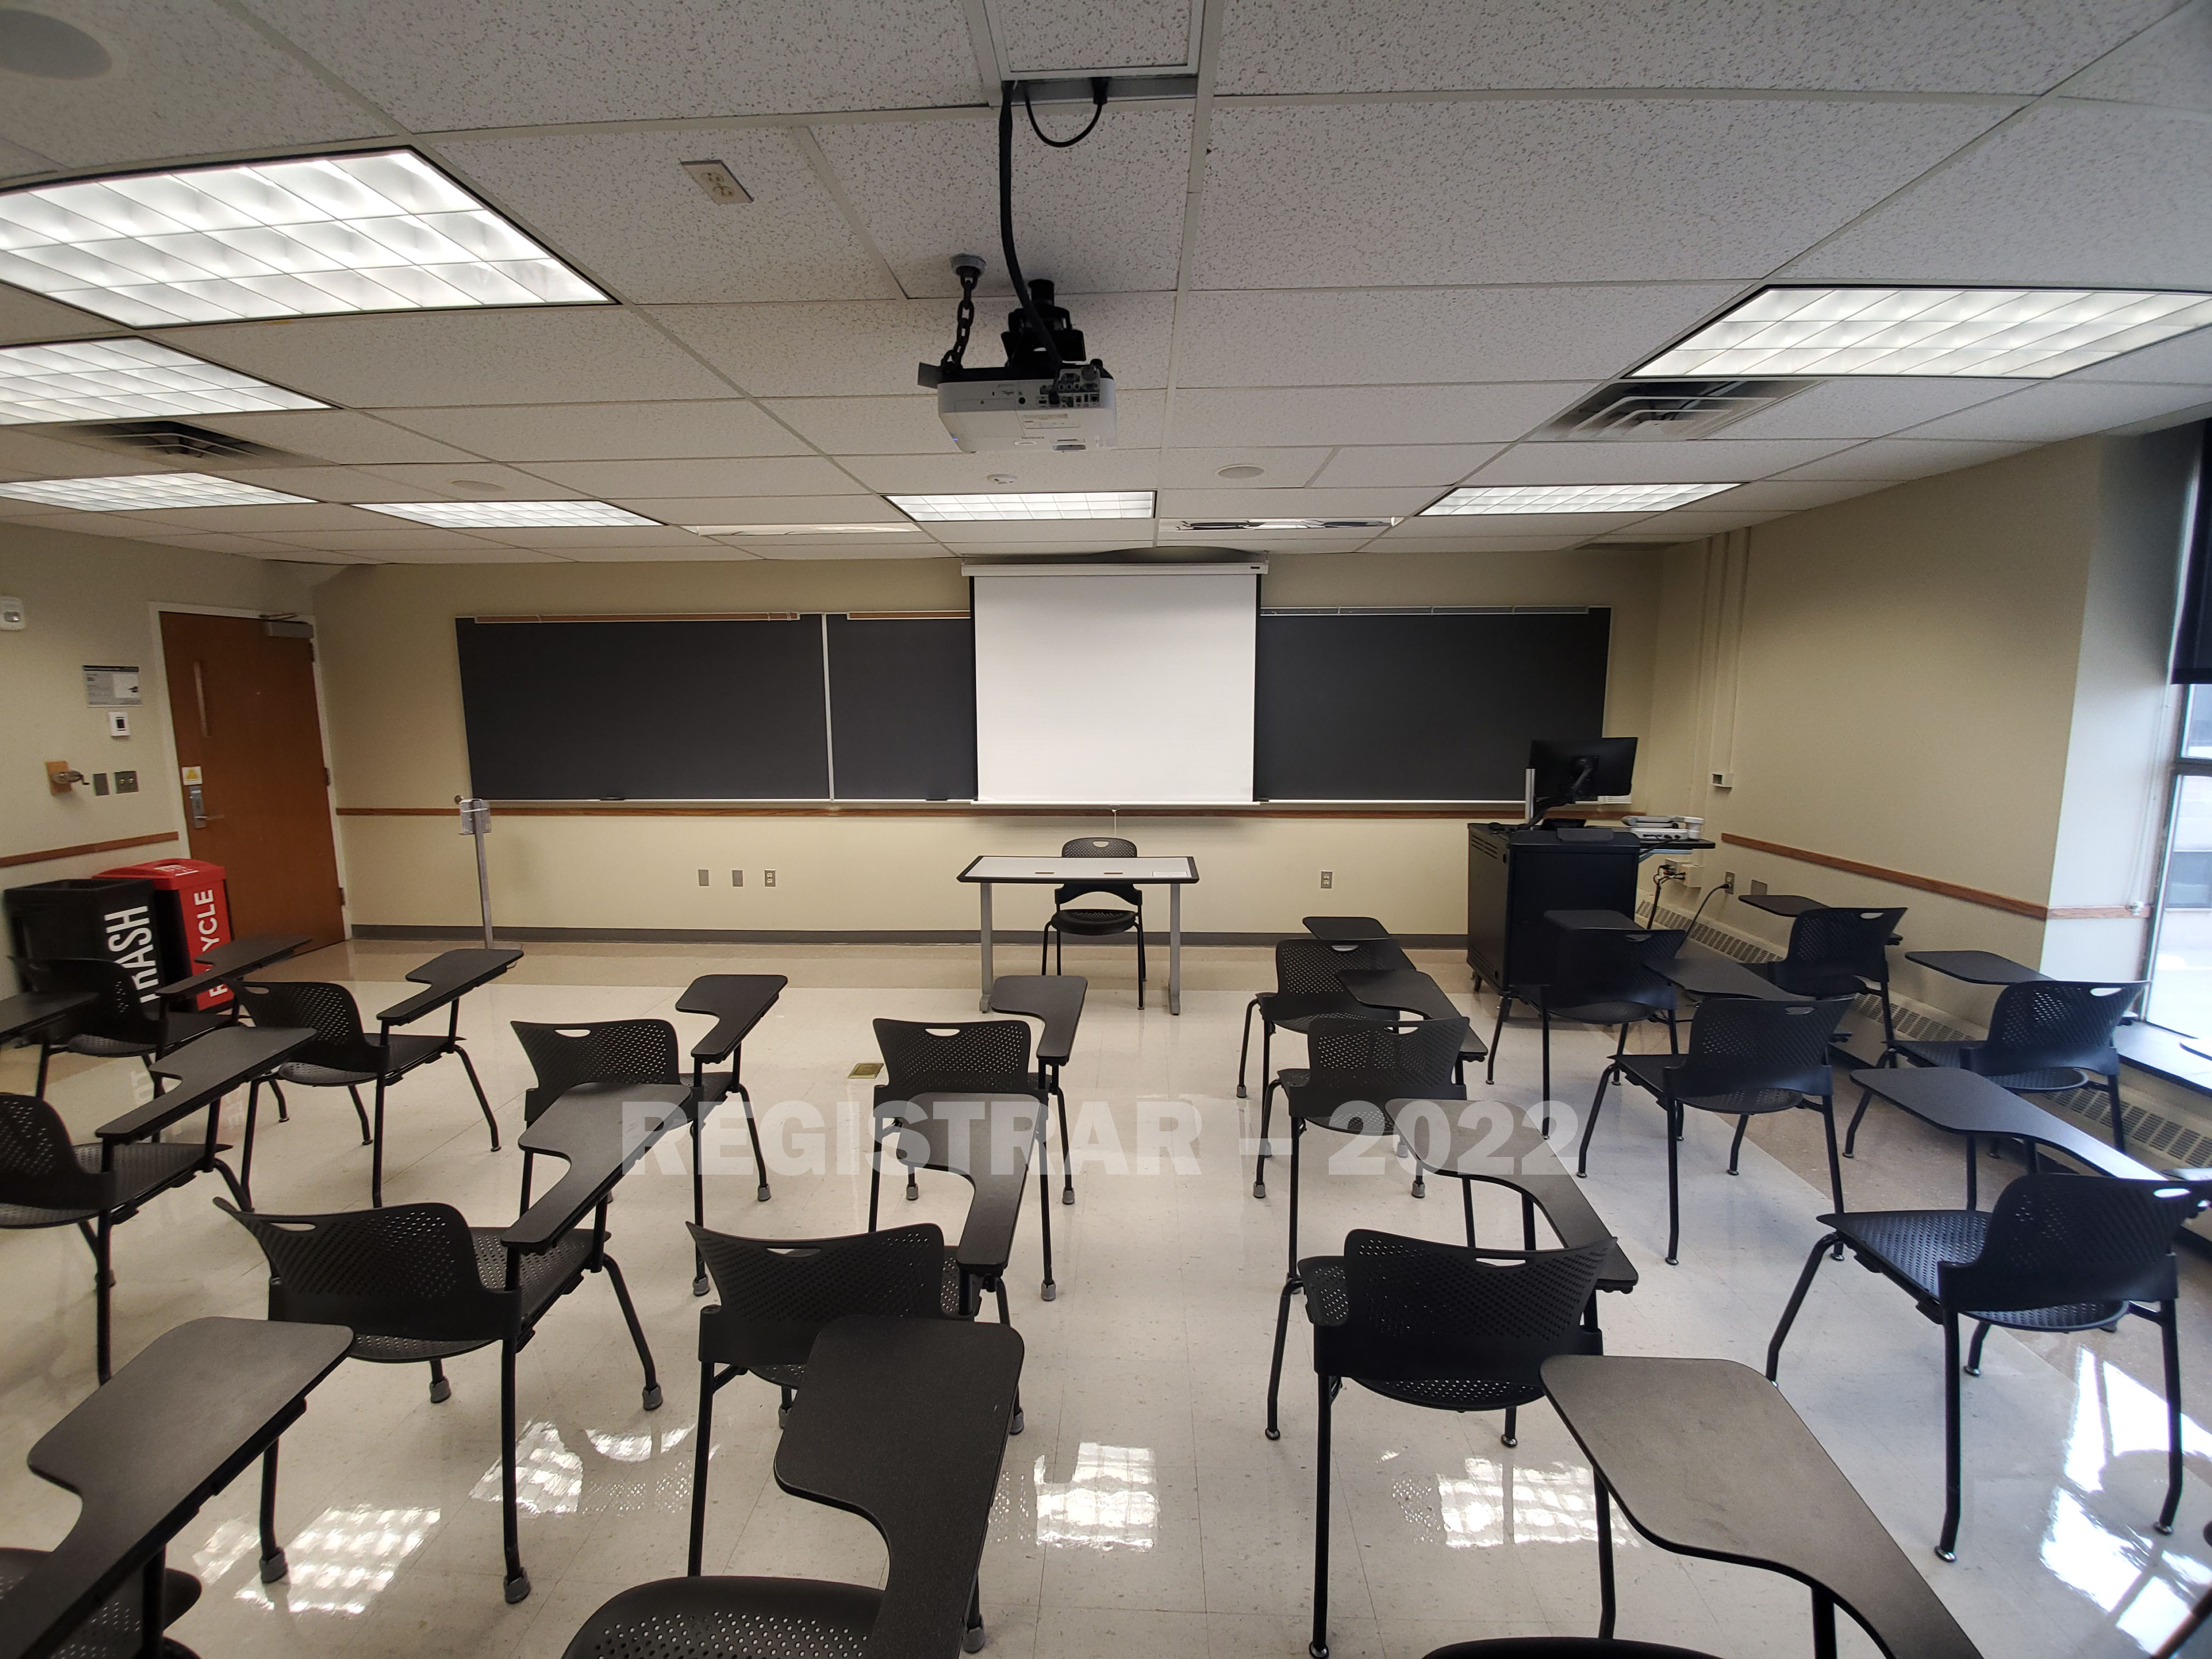 Enarson Classroom Building room 254 ultra wide angle view from the back of the room with projector screen down